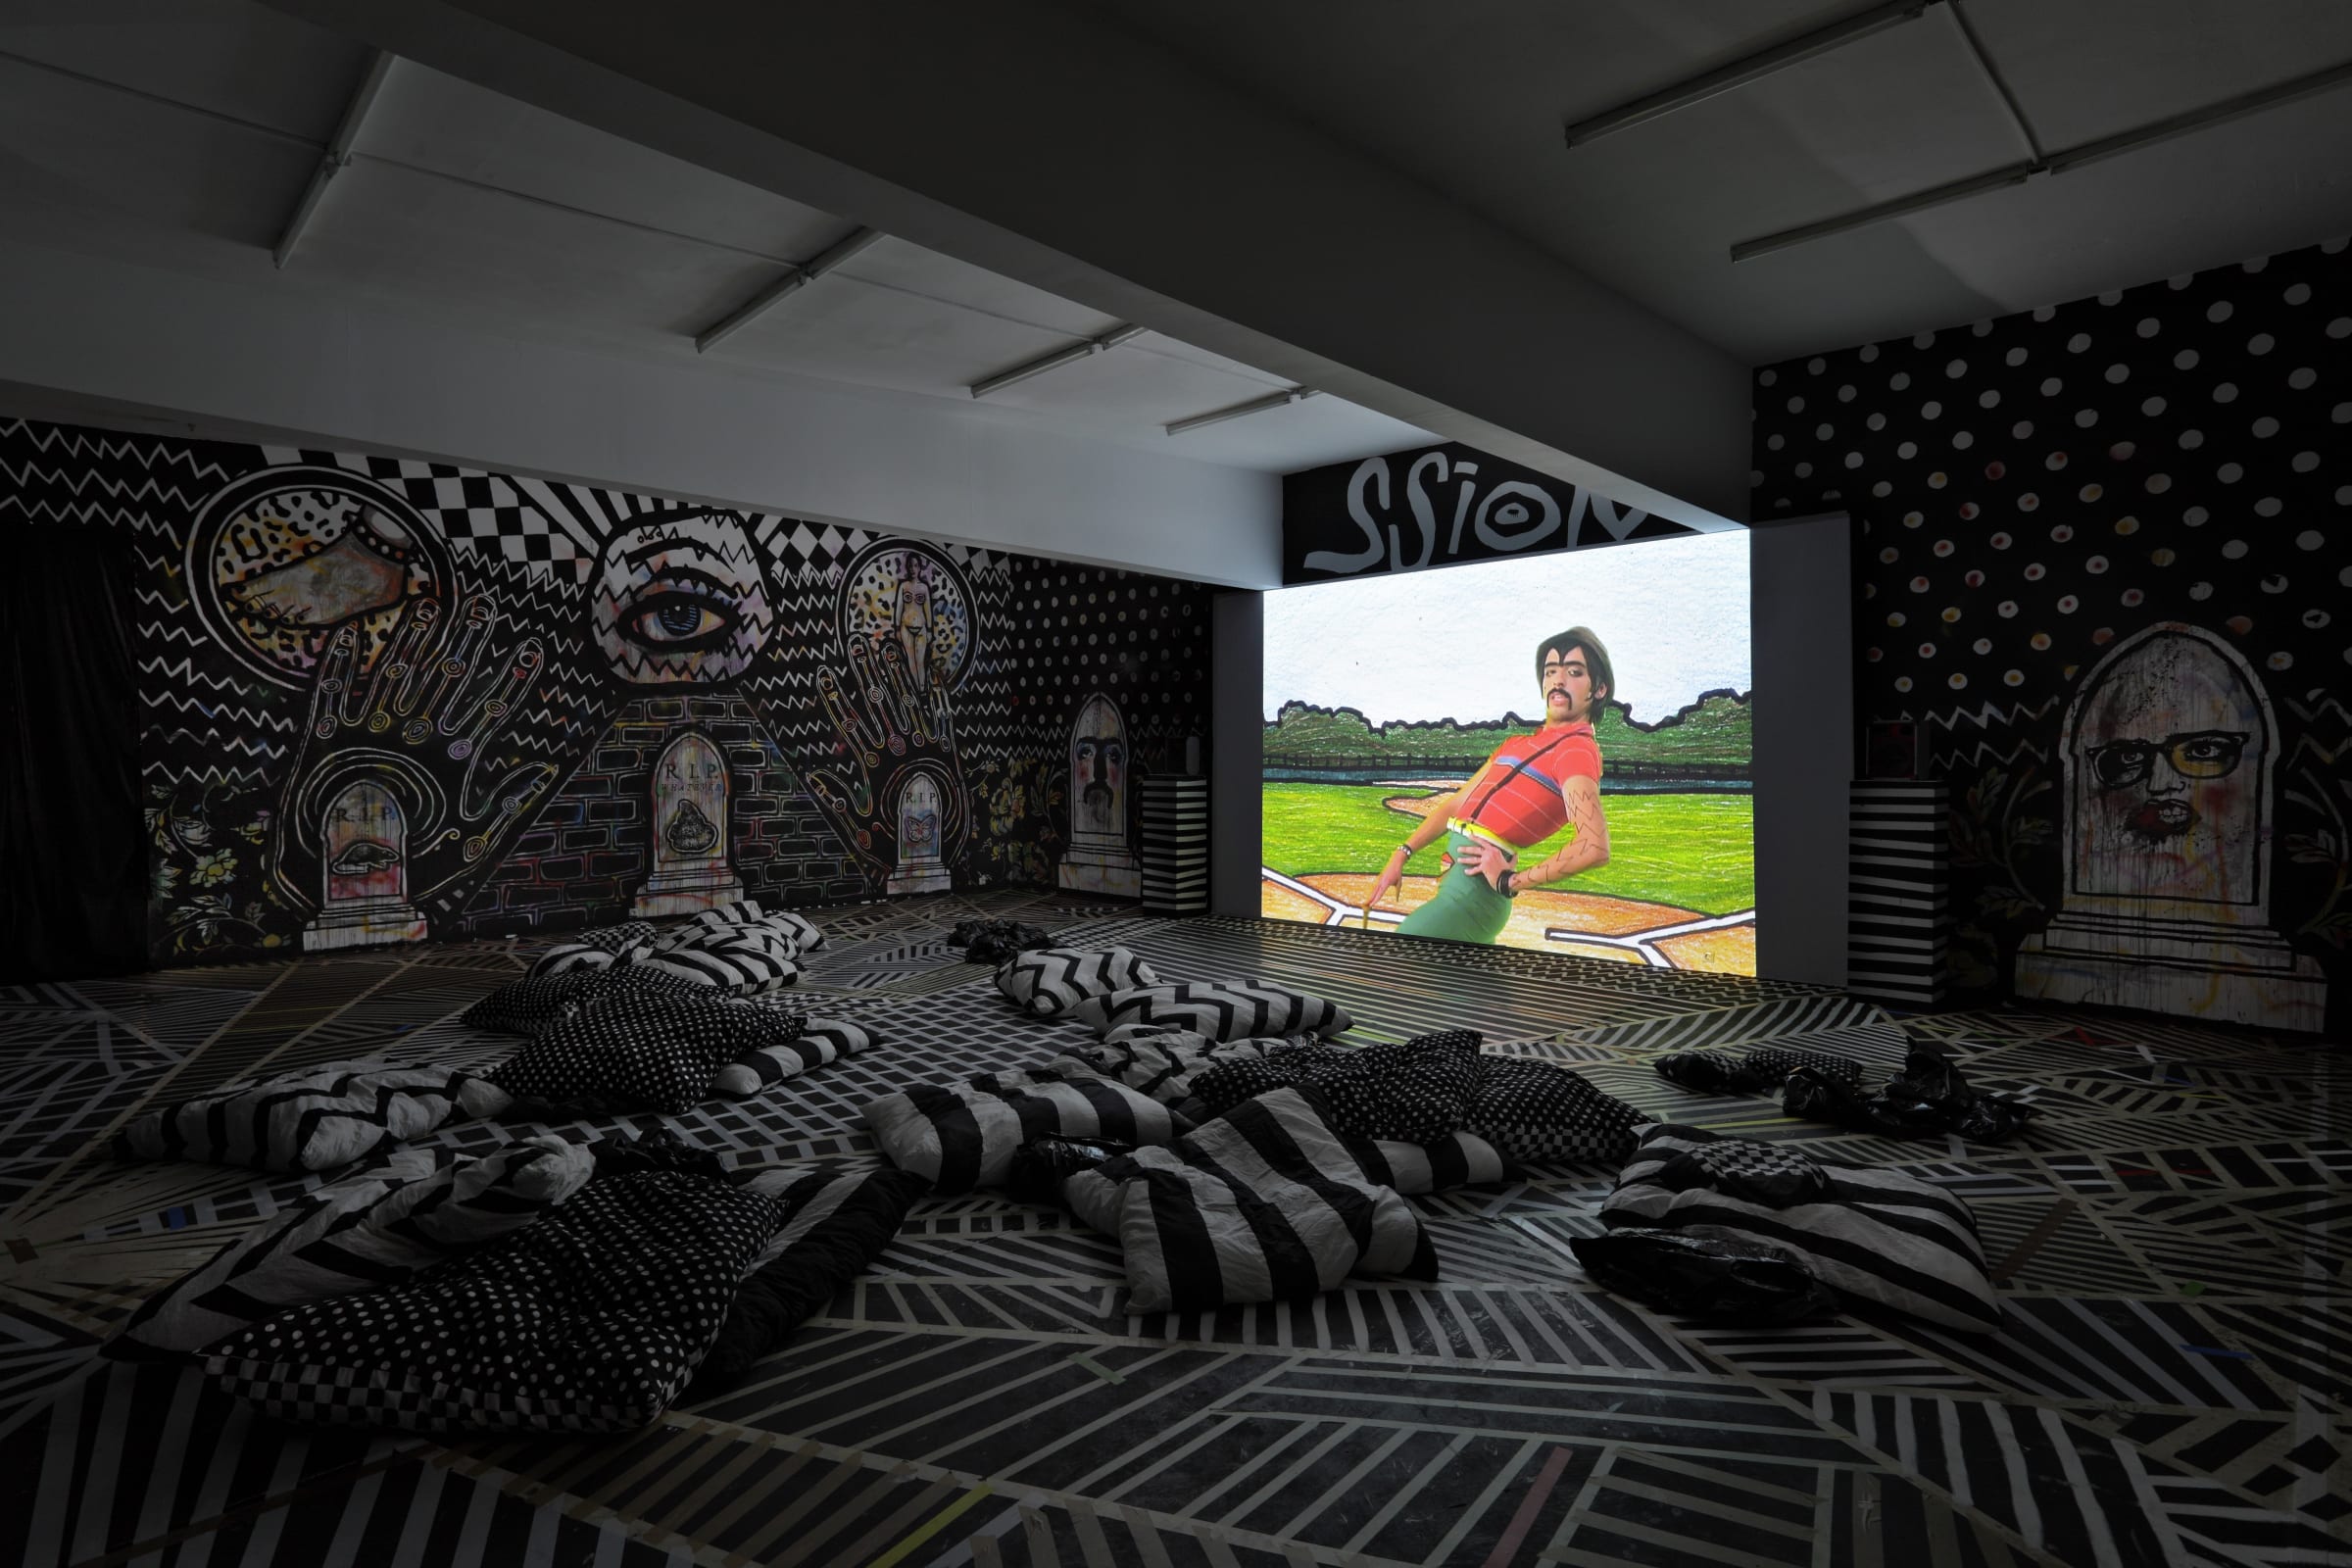 SSION BOY Installation View June 26 – August 7, 2010 Peres Projects, Berlin